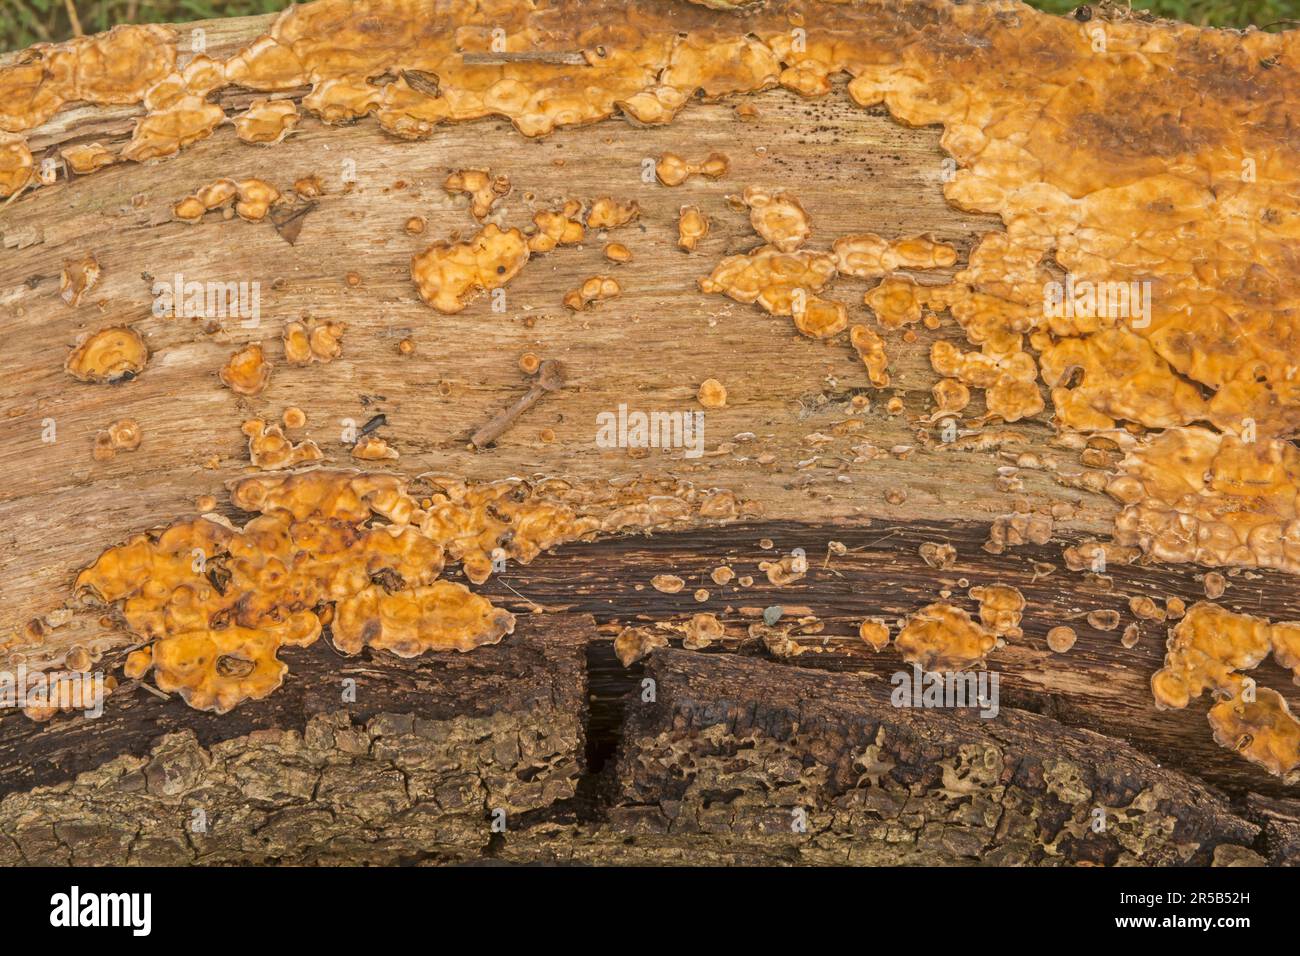 Fungus growth on old rotting wood Stock Photo